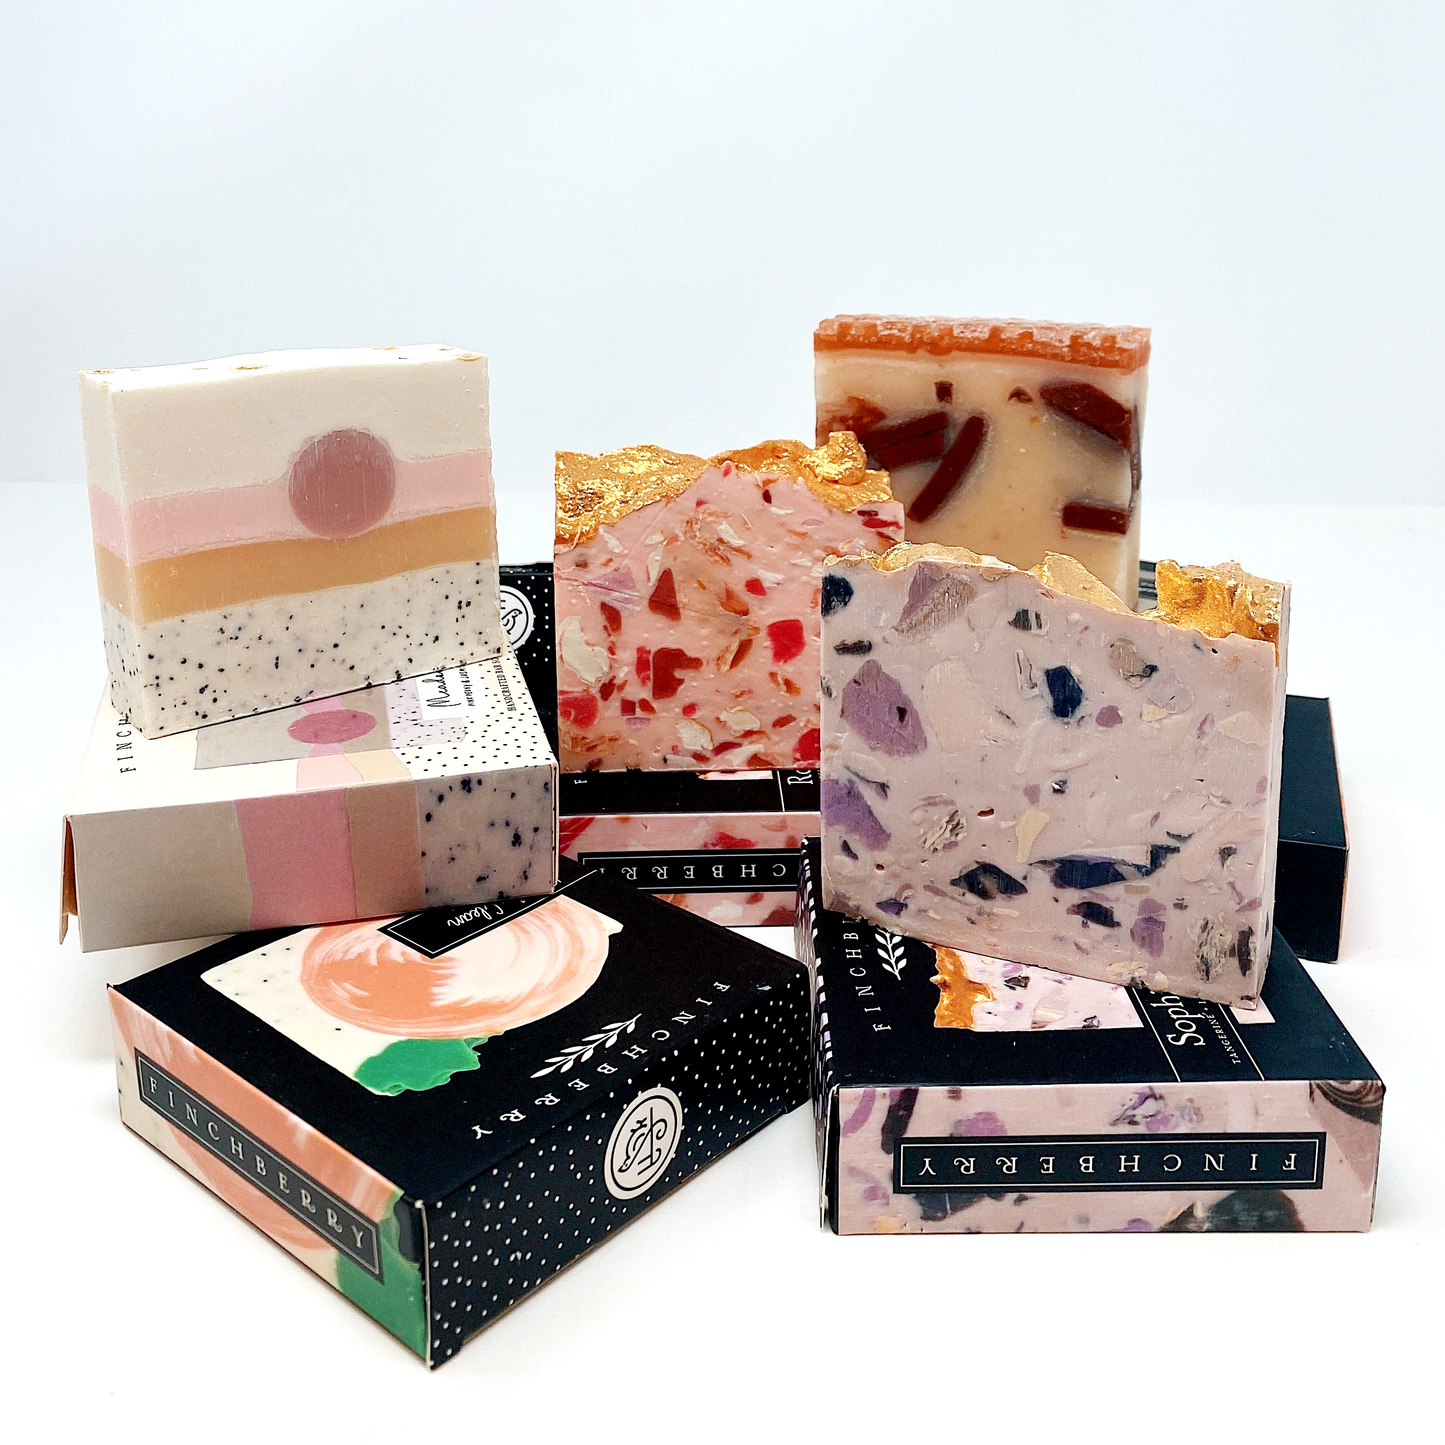 Finchberry soaps, luxury hand soaps for your home